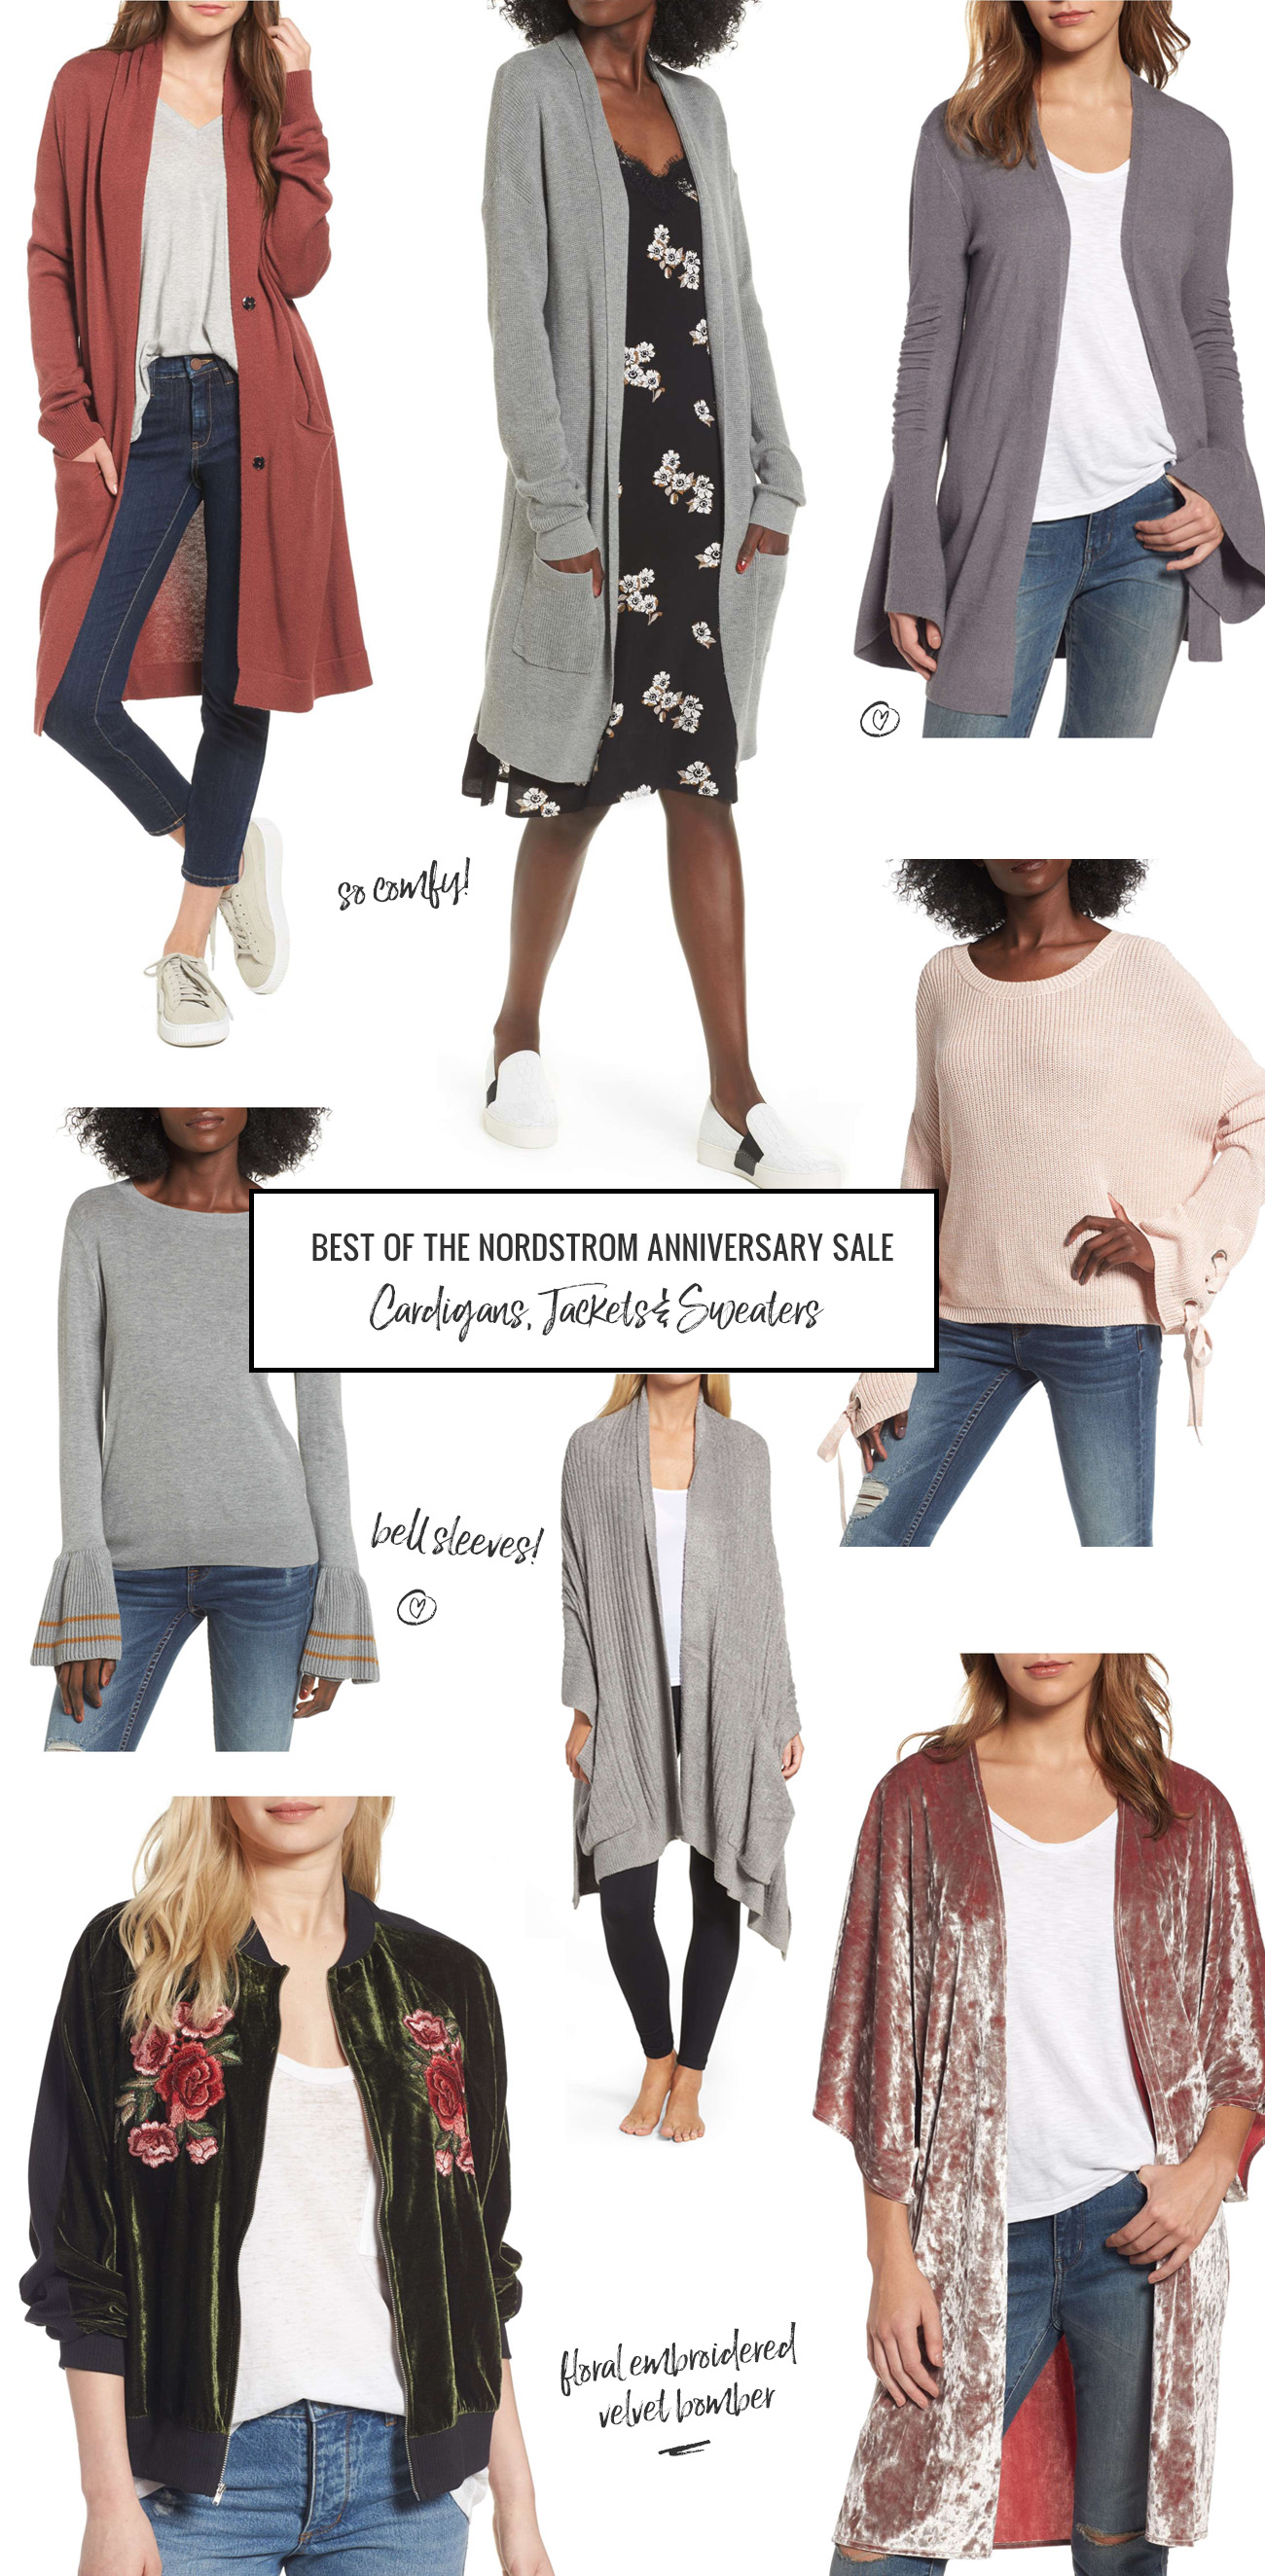 nordstrom sale jackets and cardigans